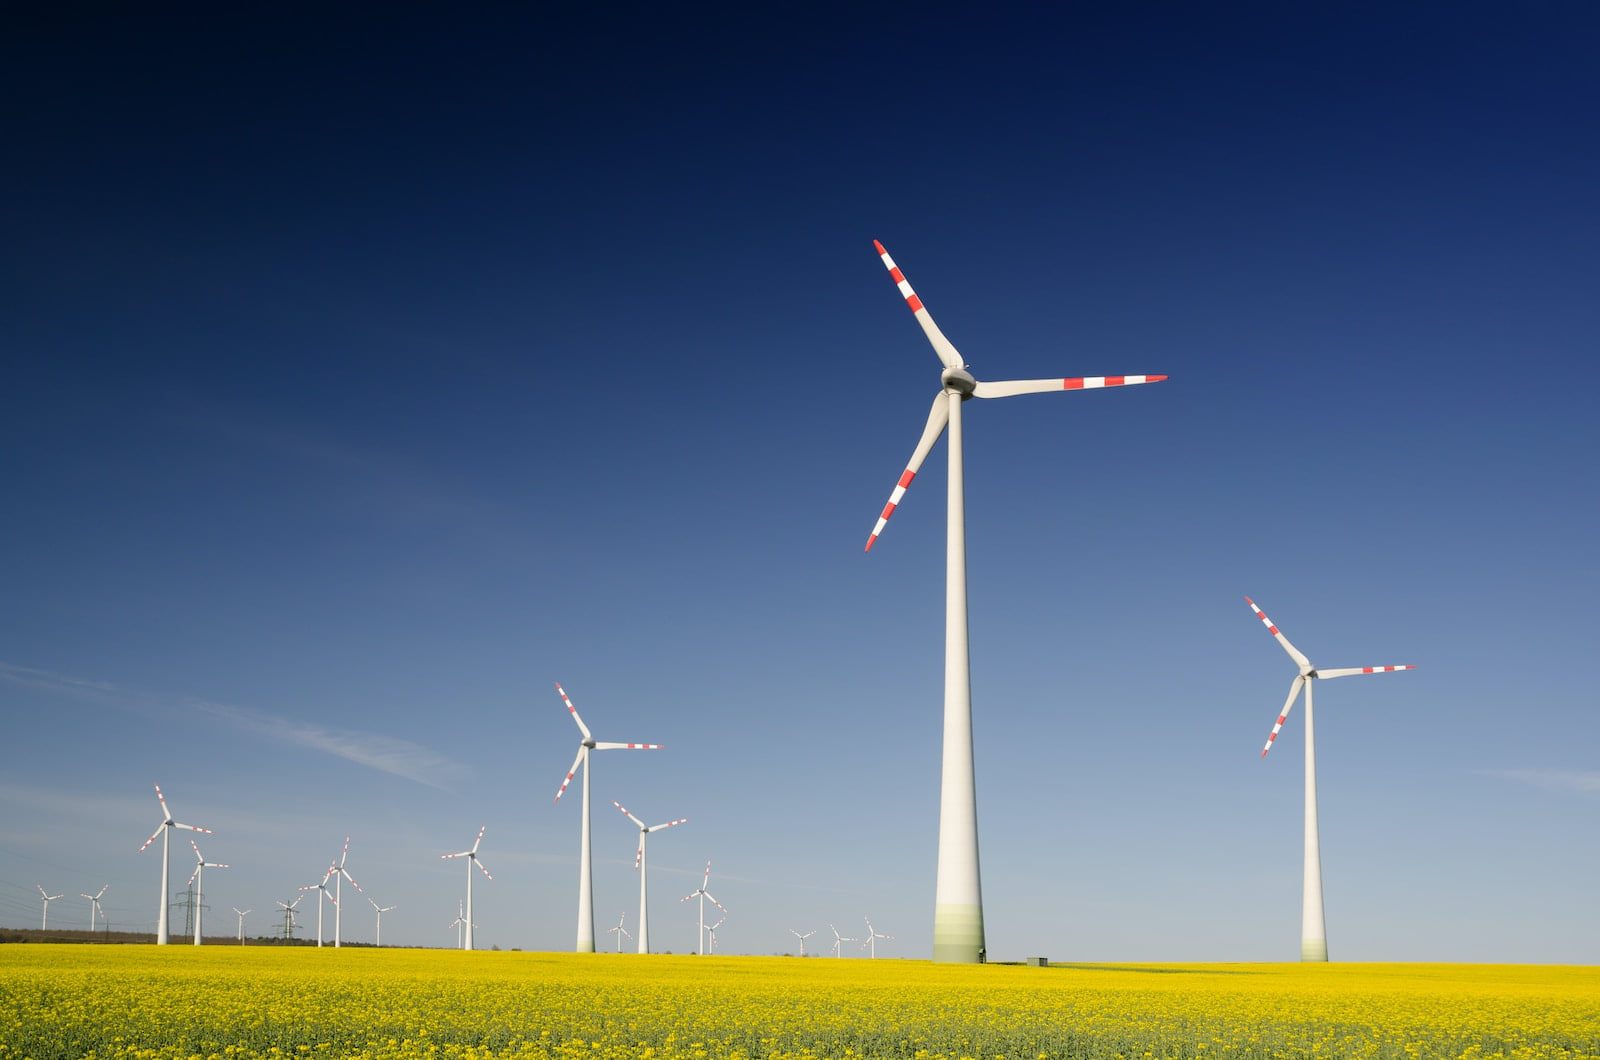 renewable energy - wind turbines on grass field at daytime